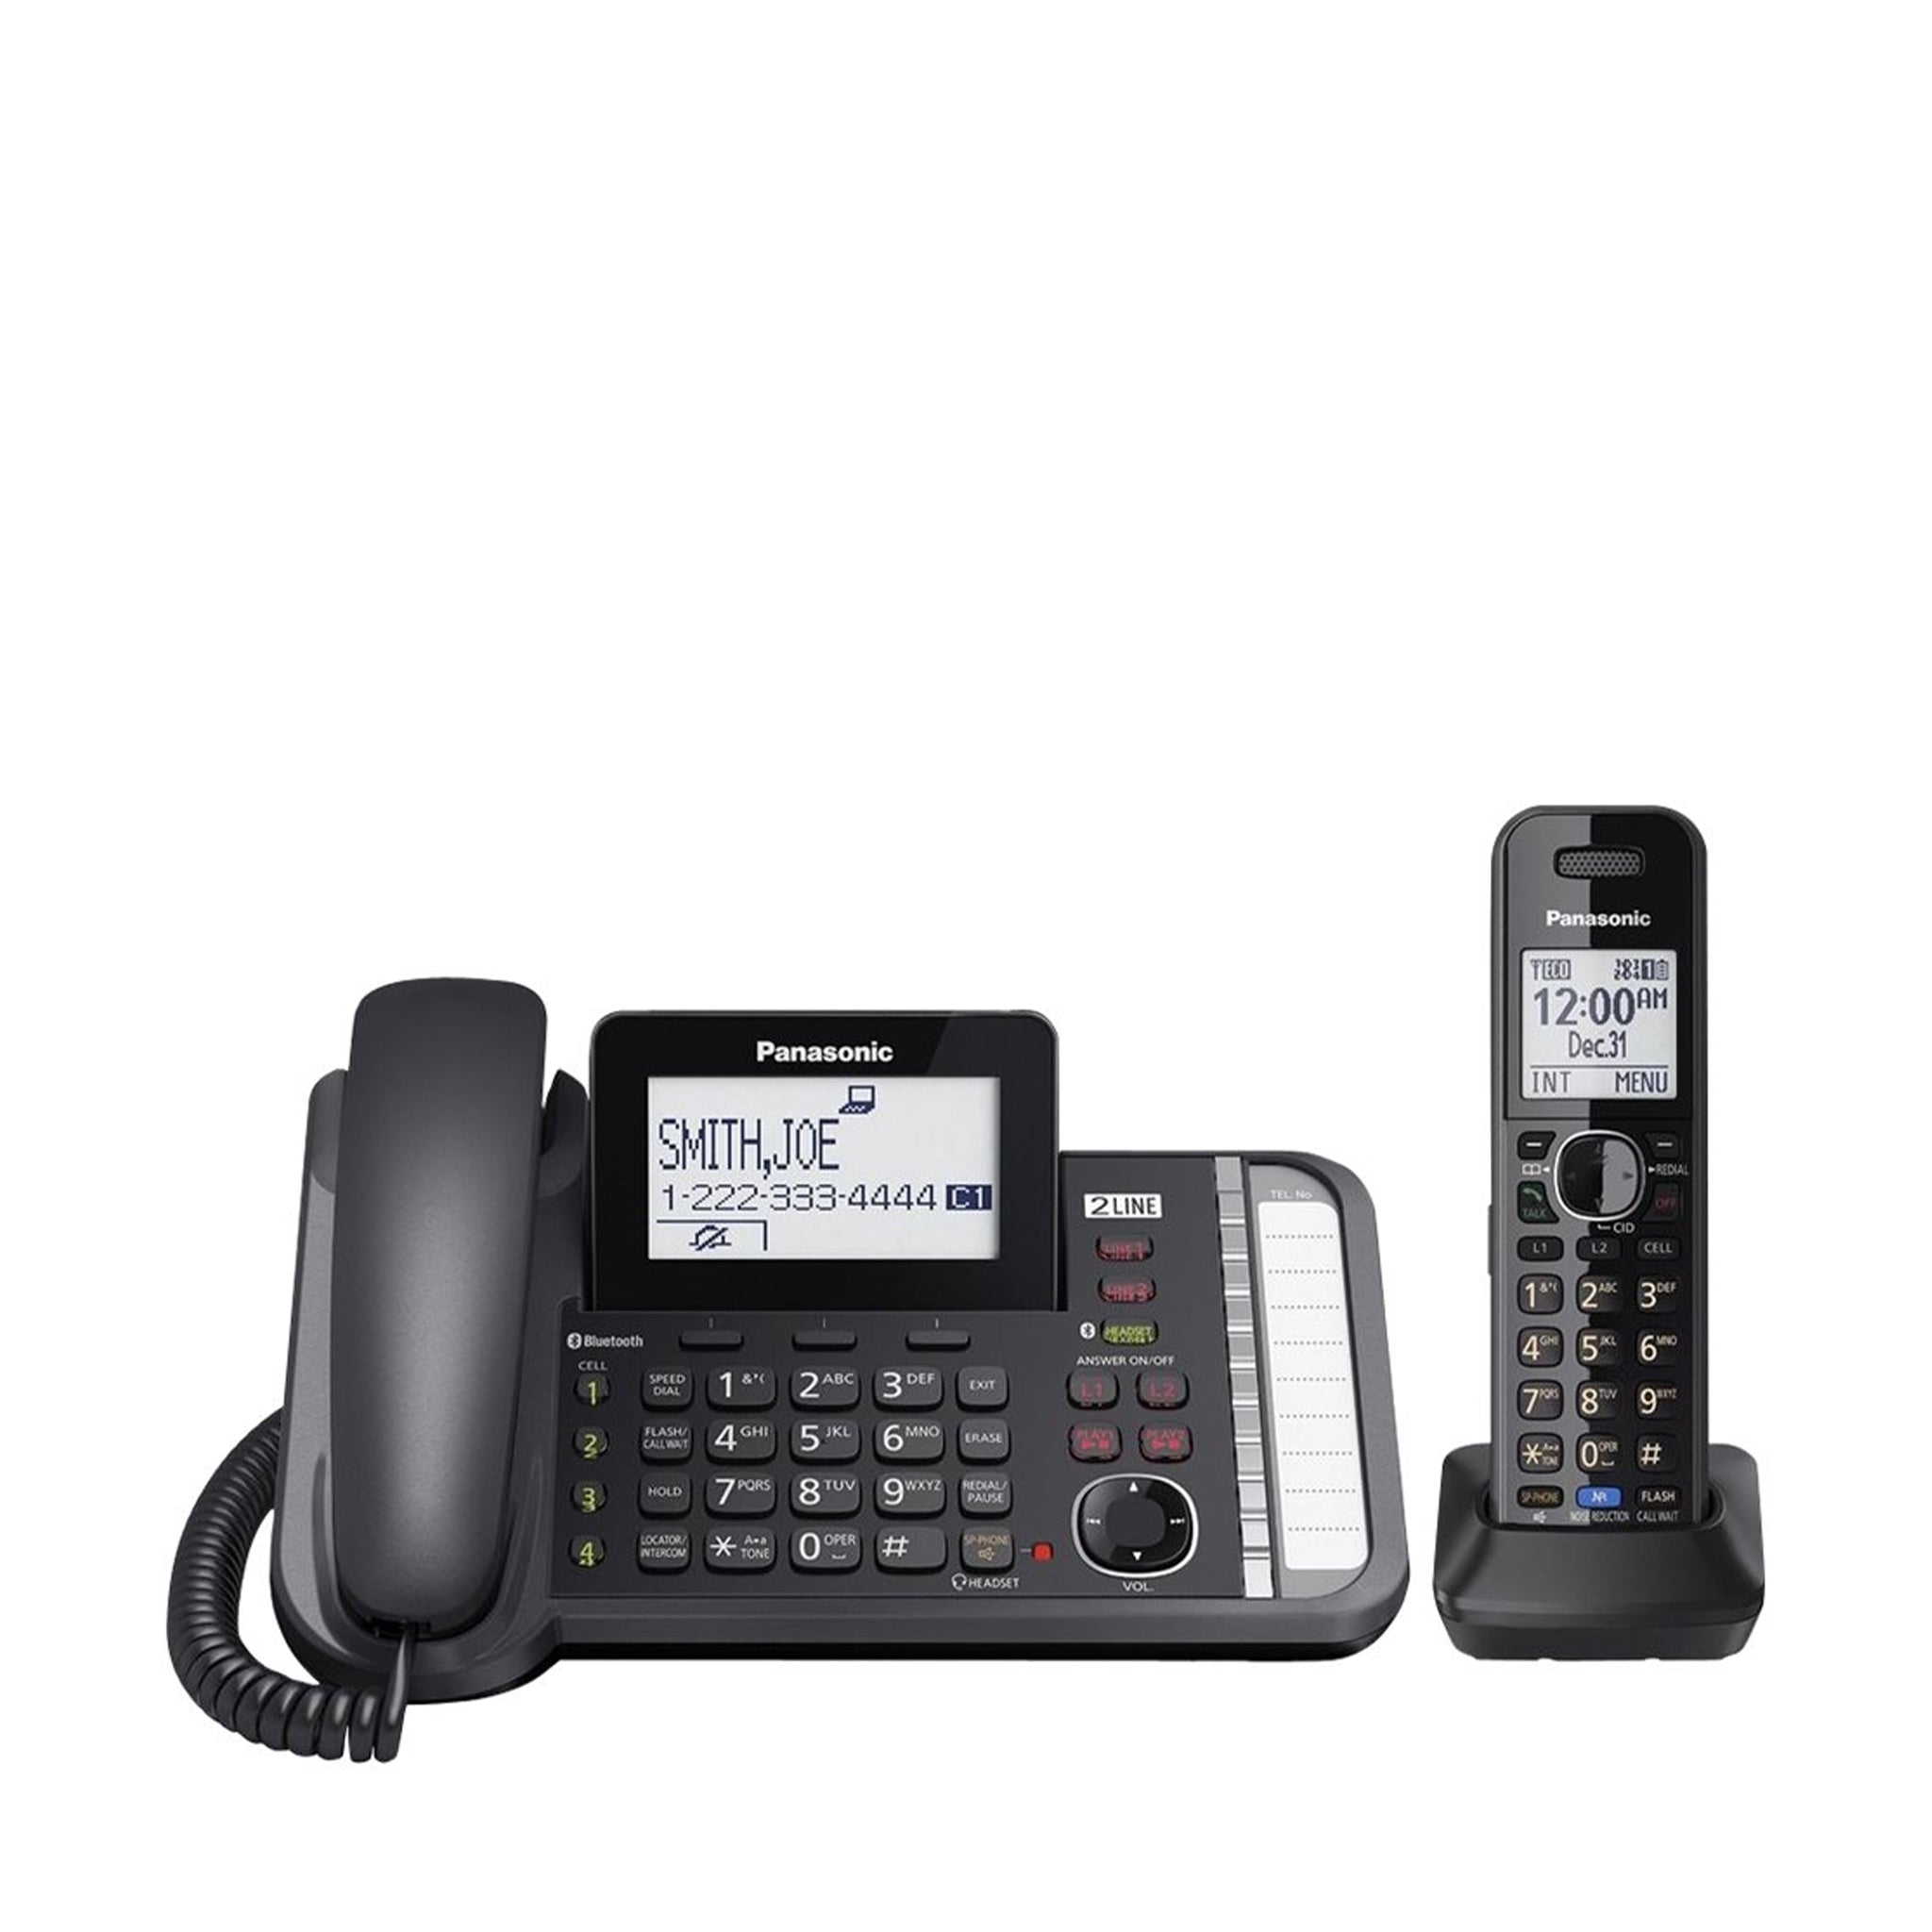 Corded and Cordless Phone - KX-TG958x Series